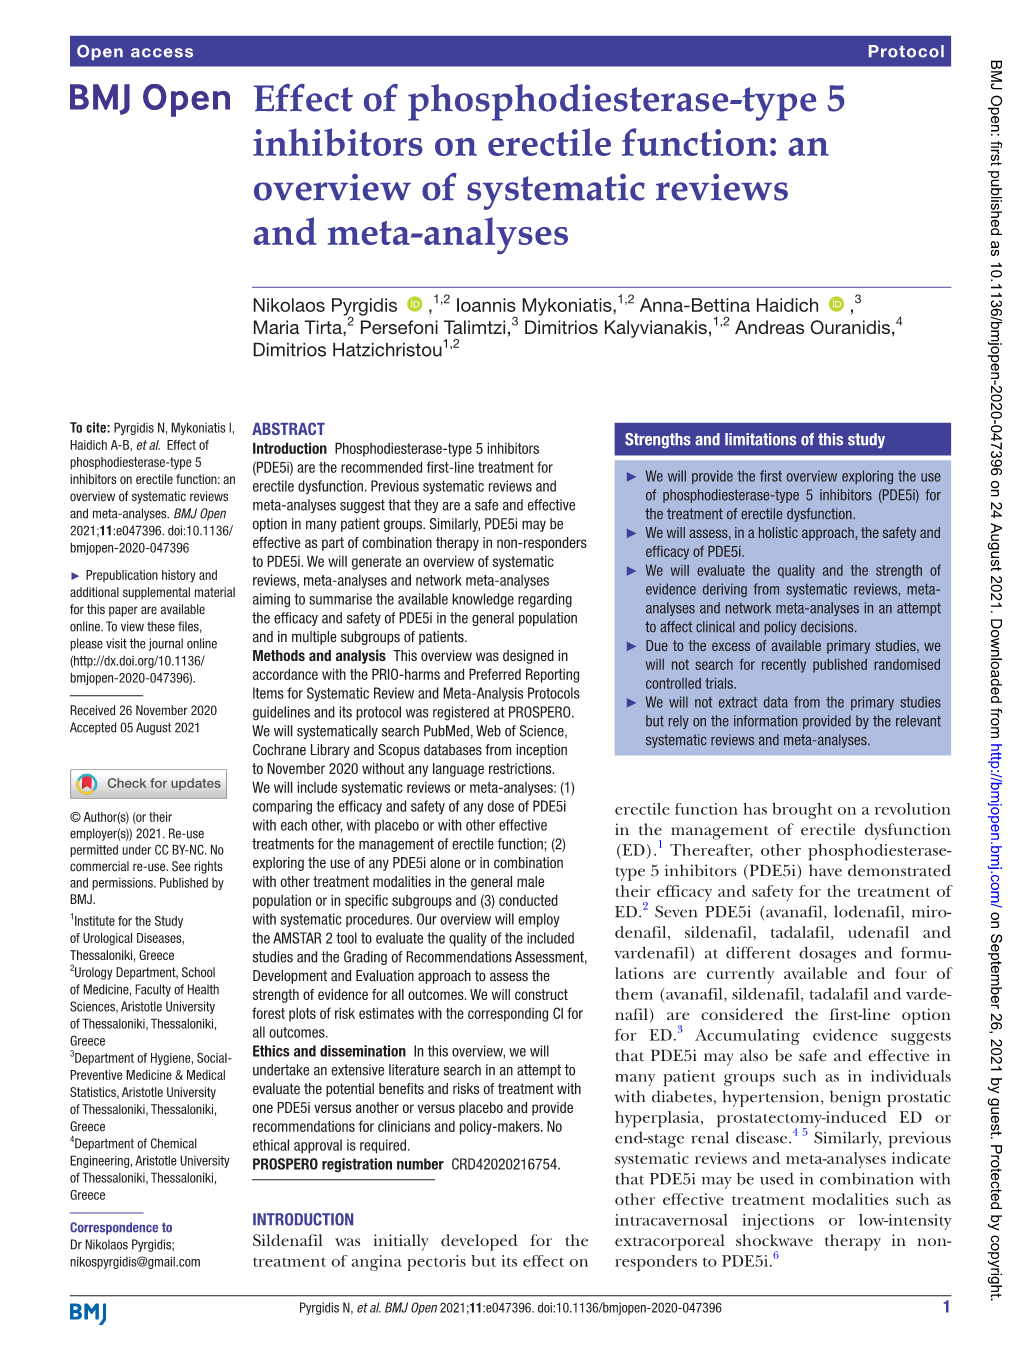 Effect of Phosphodiesterase- Type 5 Inhibitors on Erectile Function: an Overview of Systematic Reviews and Meta- Analyses